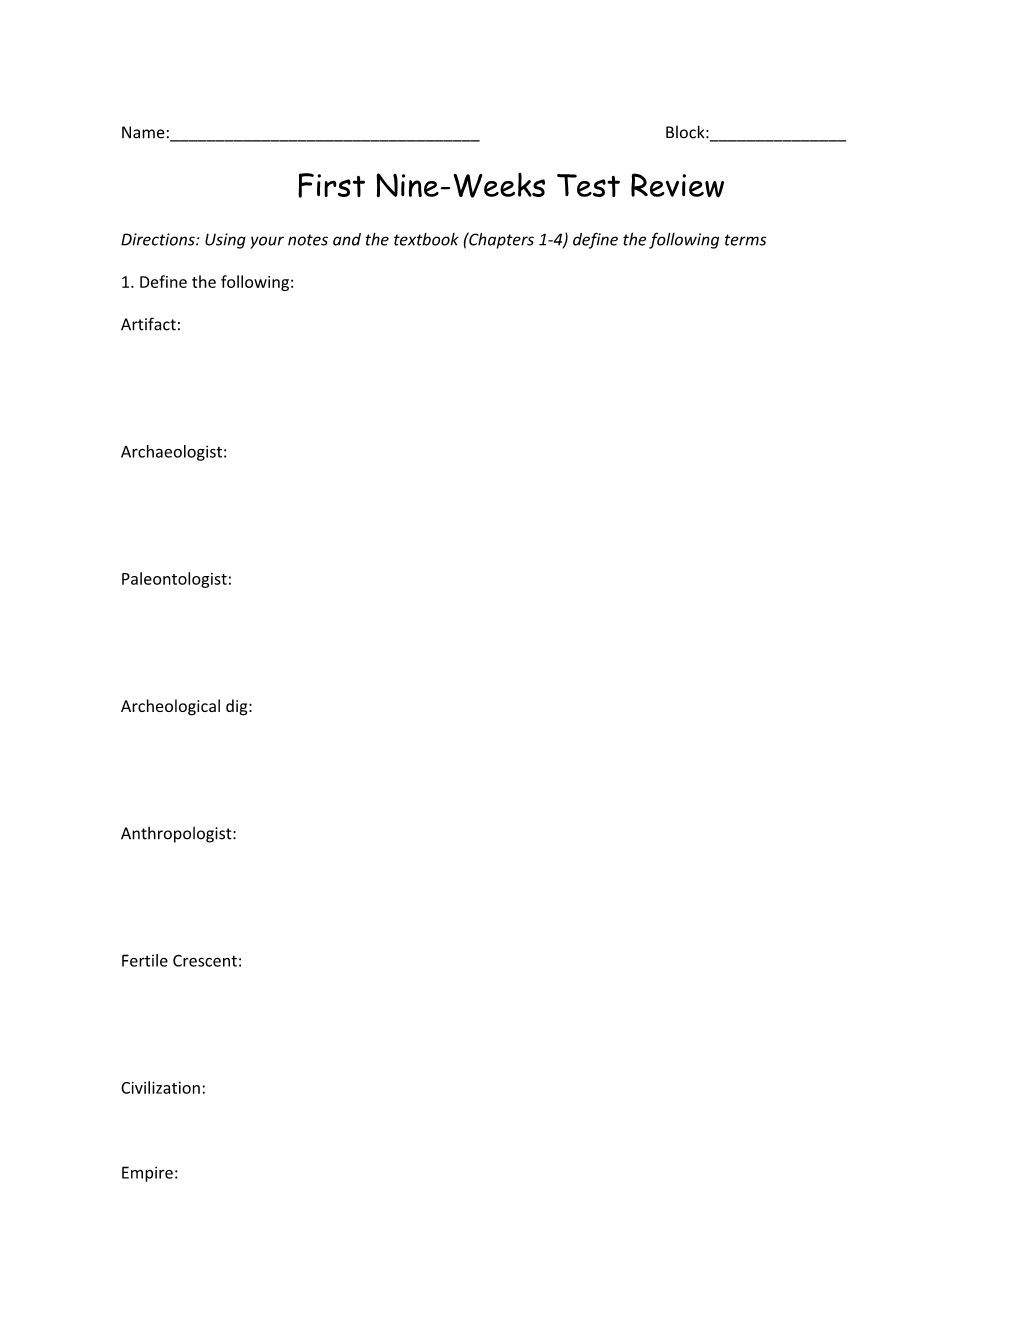 First Nine-Weeks Test Review